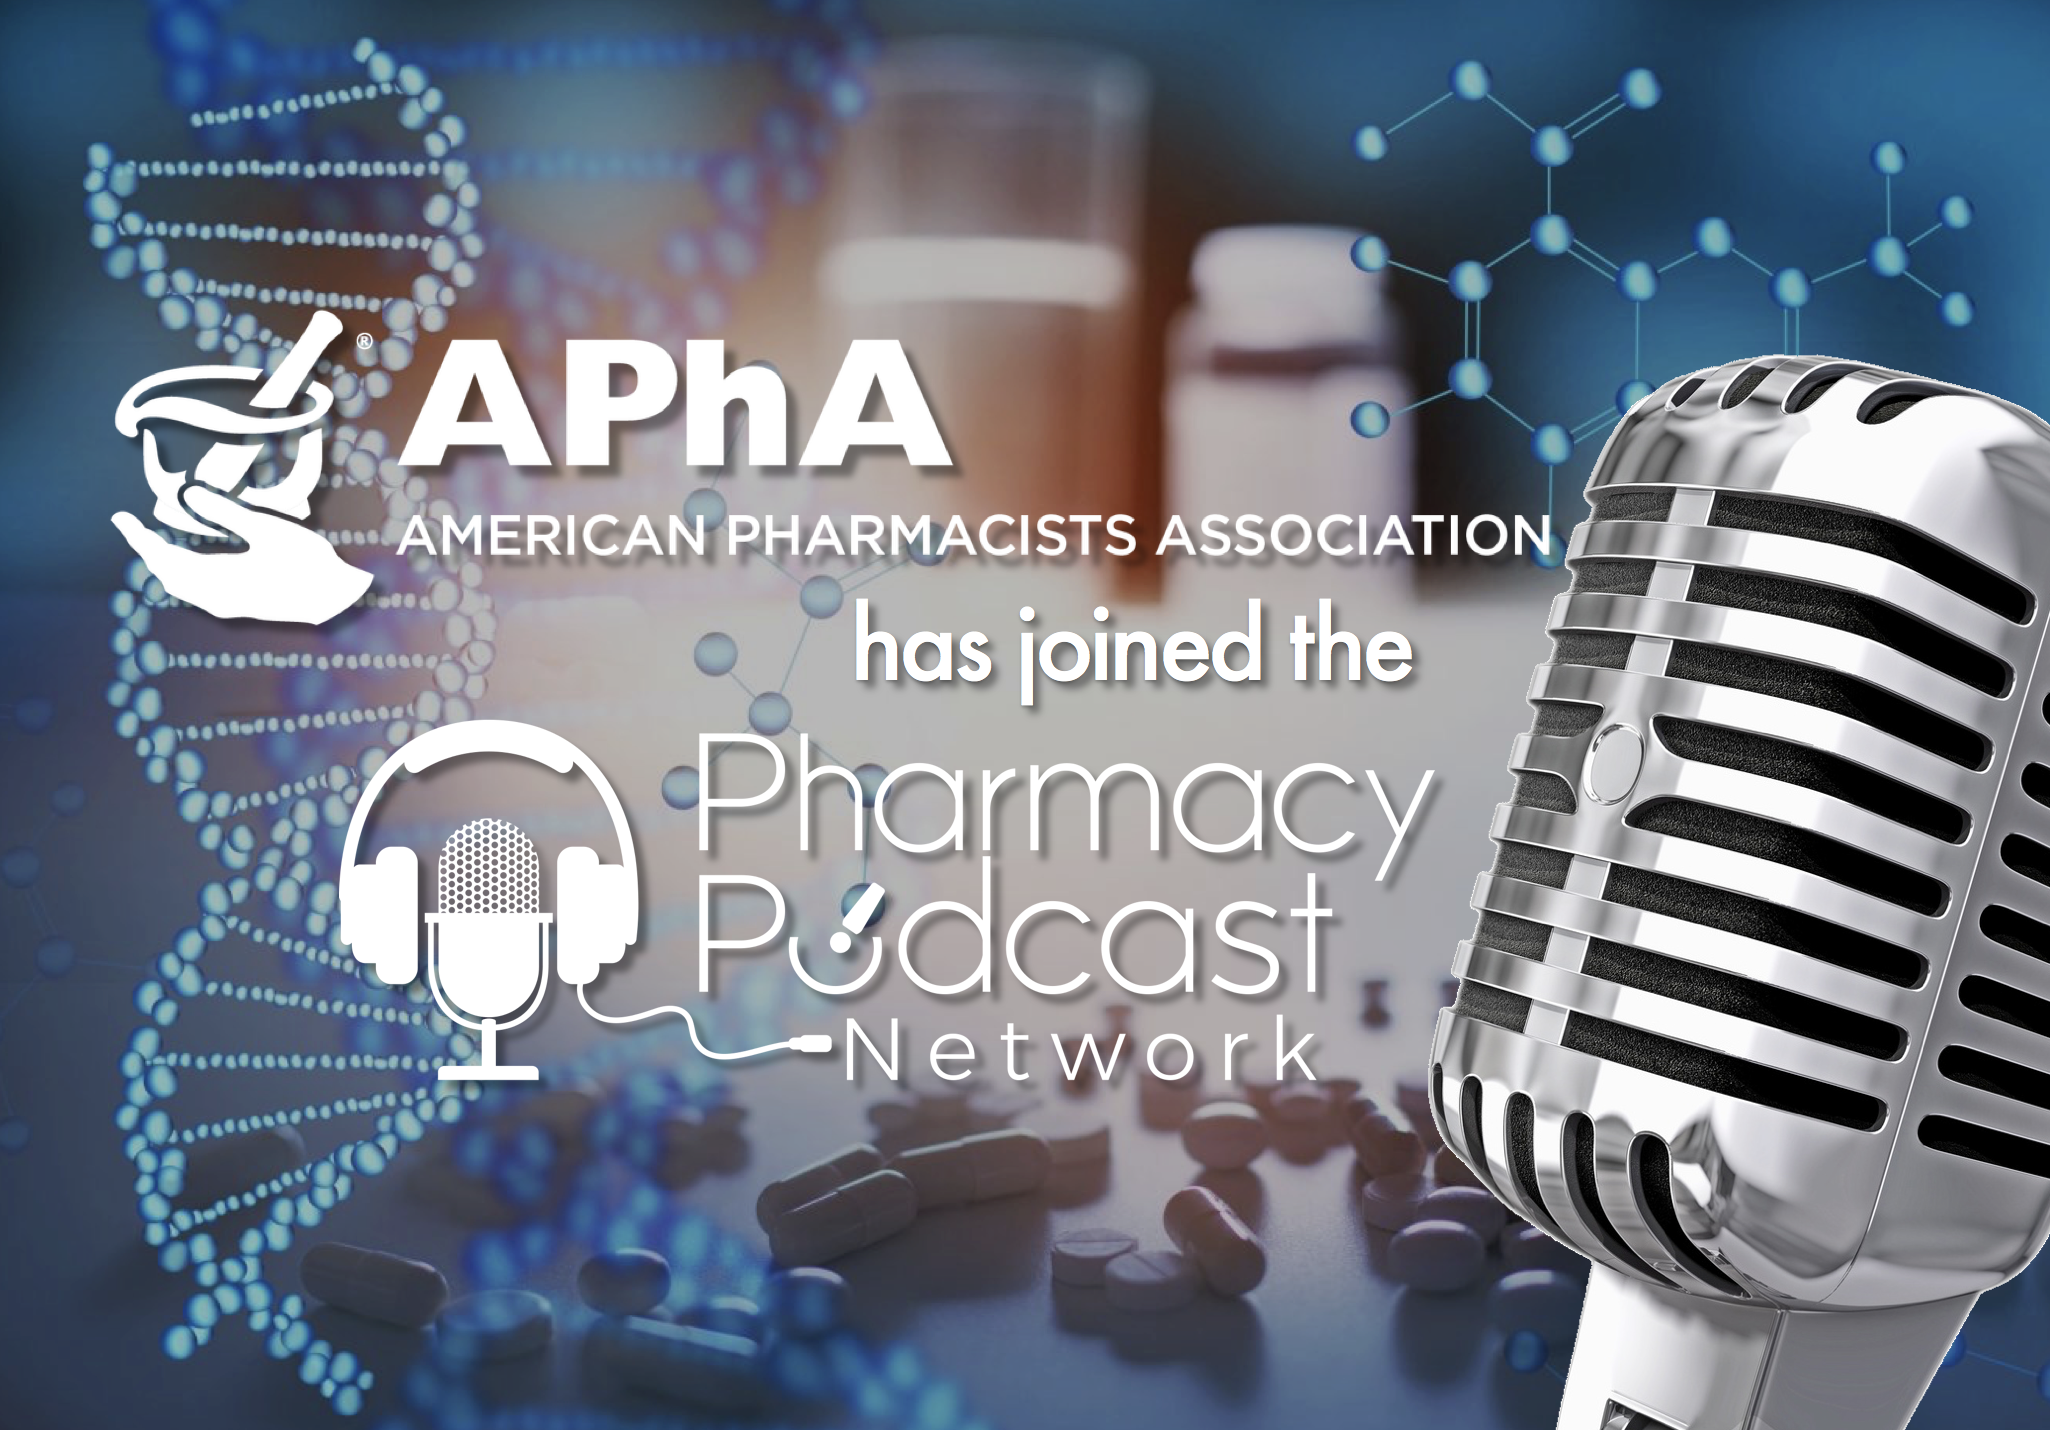 American Pharmacists Association and Pharmacy Podcast Network Announce Exclusive Collaboration Agreement